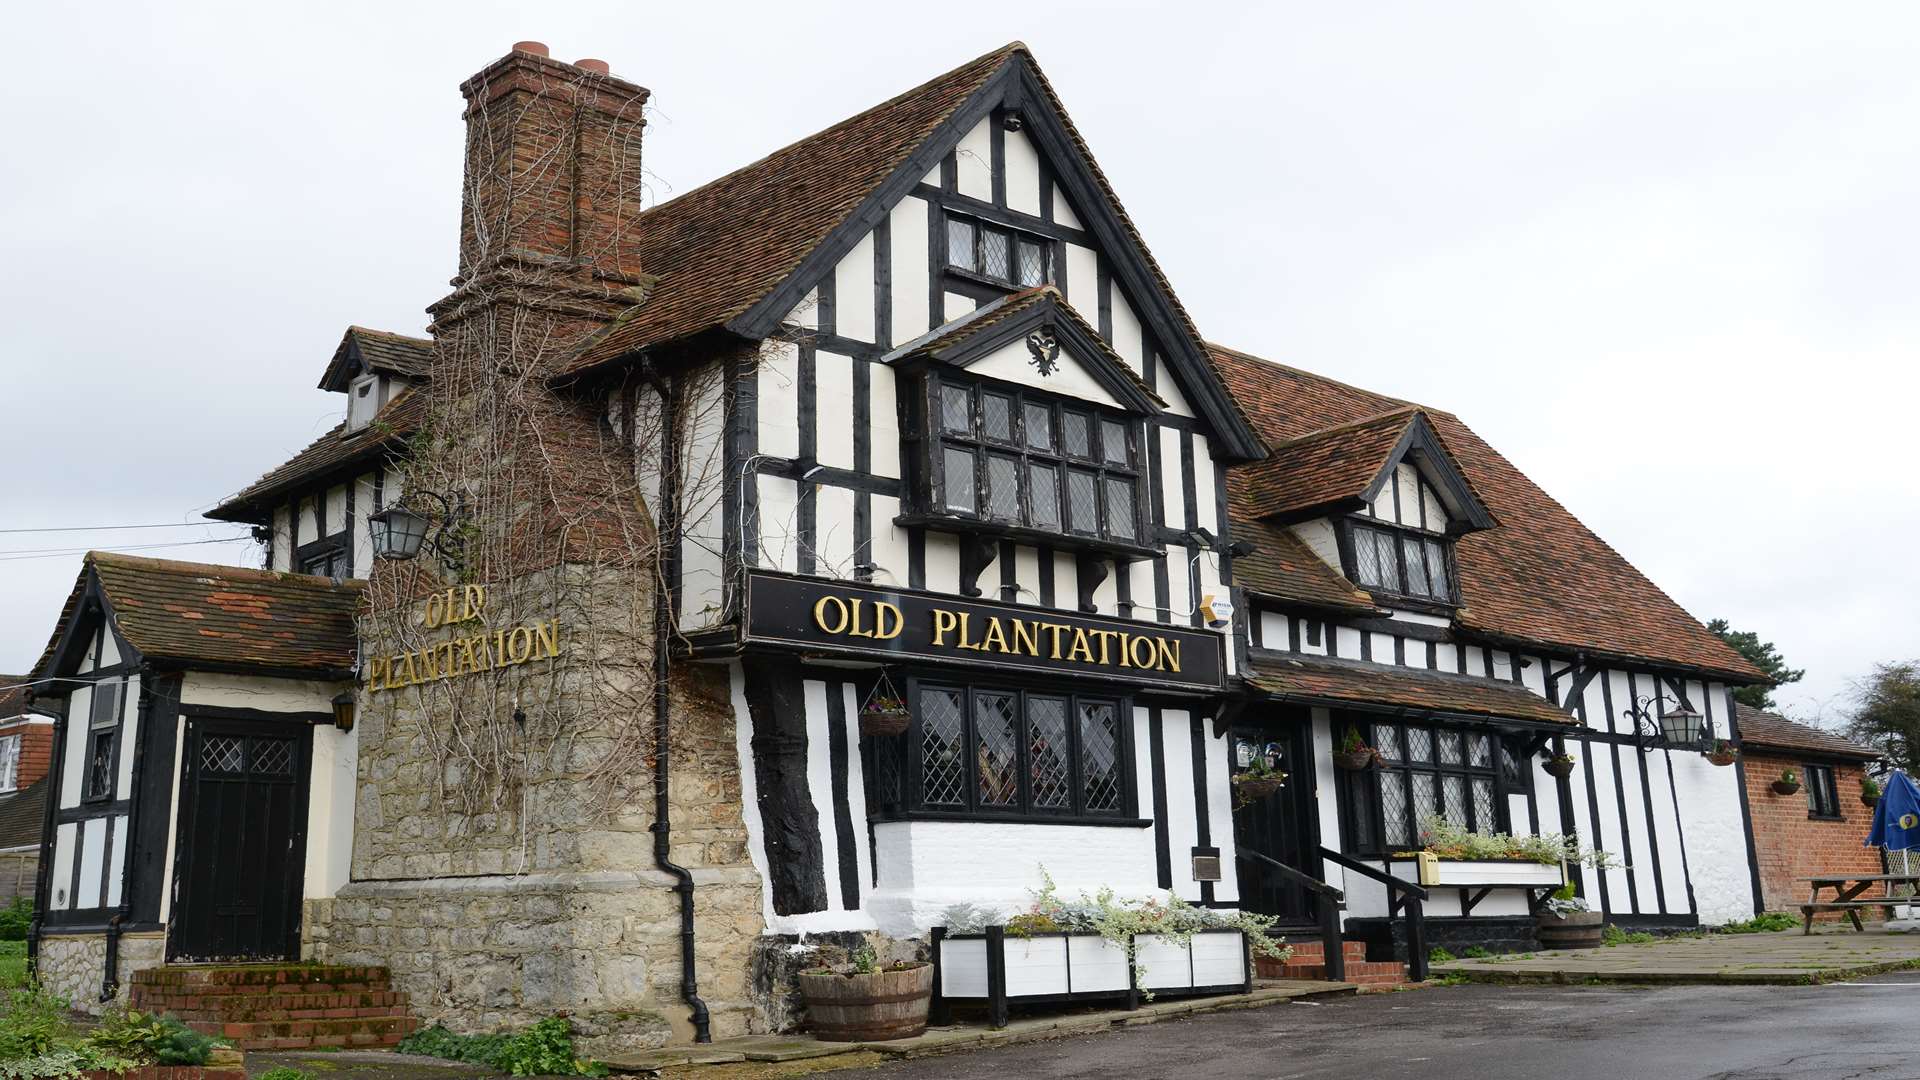 The Old Plantation Inn in Bearsted